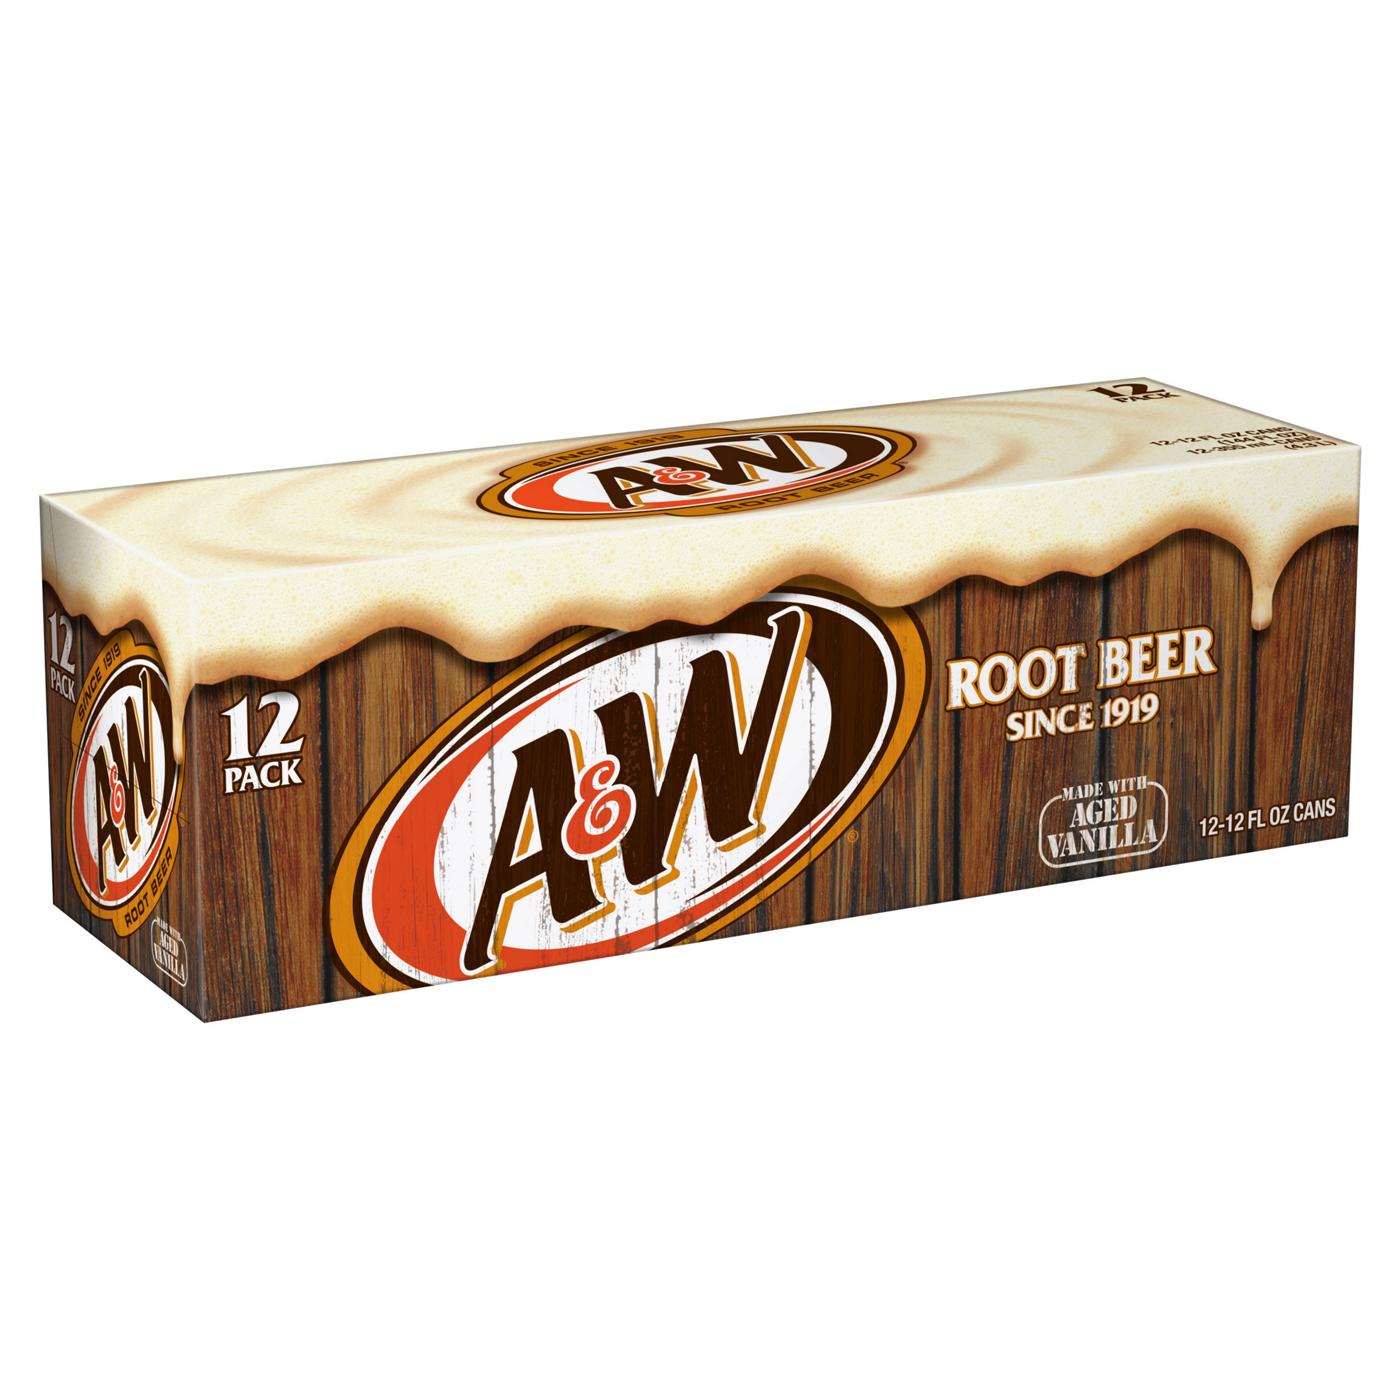 A&W Root Beer 12 oz Cans; image 1 of 2